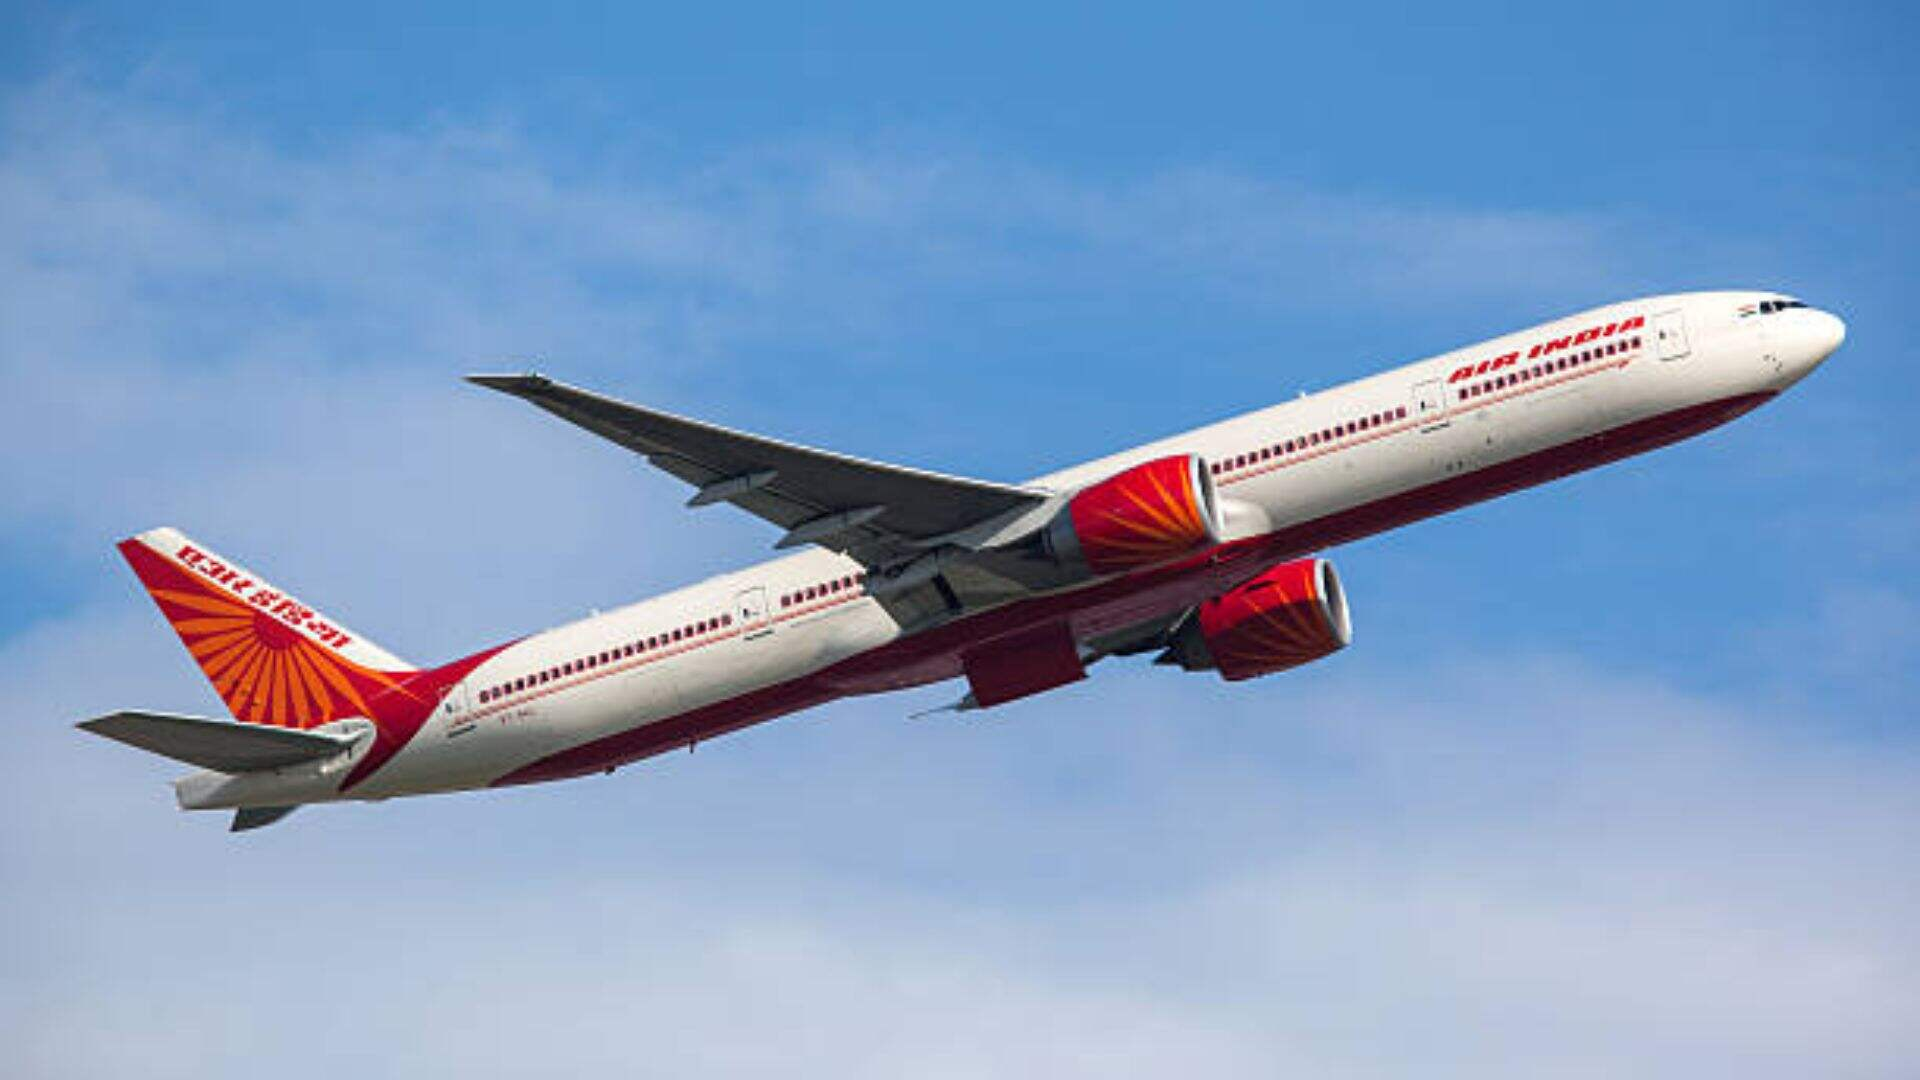 Air India Flight Collides with Tug Truck at Pune Airport: All Passengers Safe